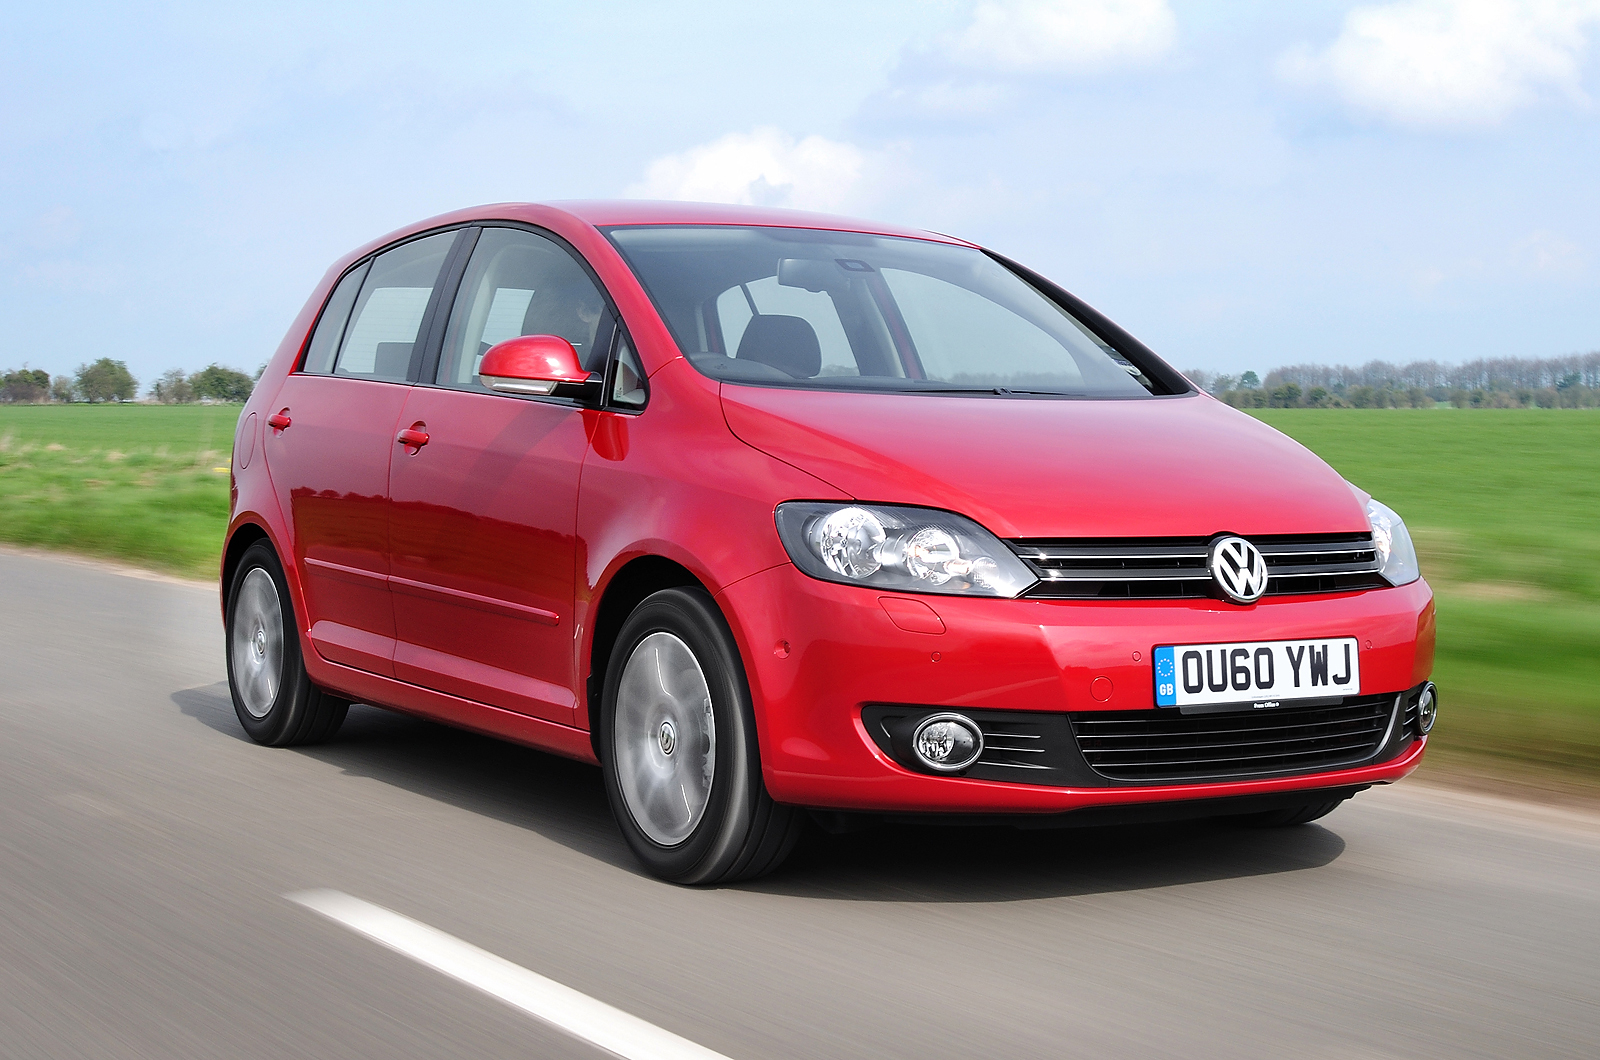 Used Volkswagen Golf Plus 2009-2013 review